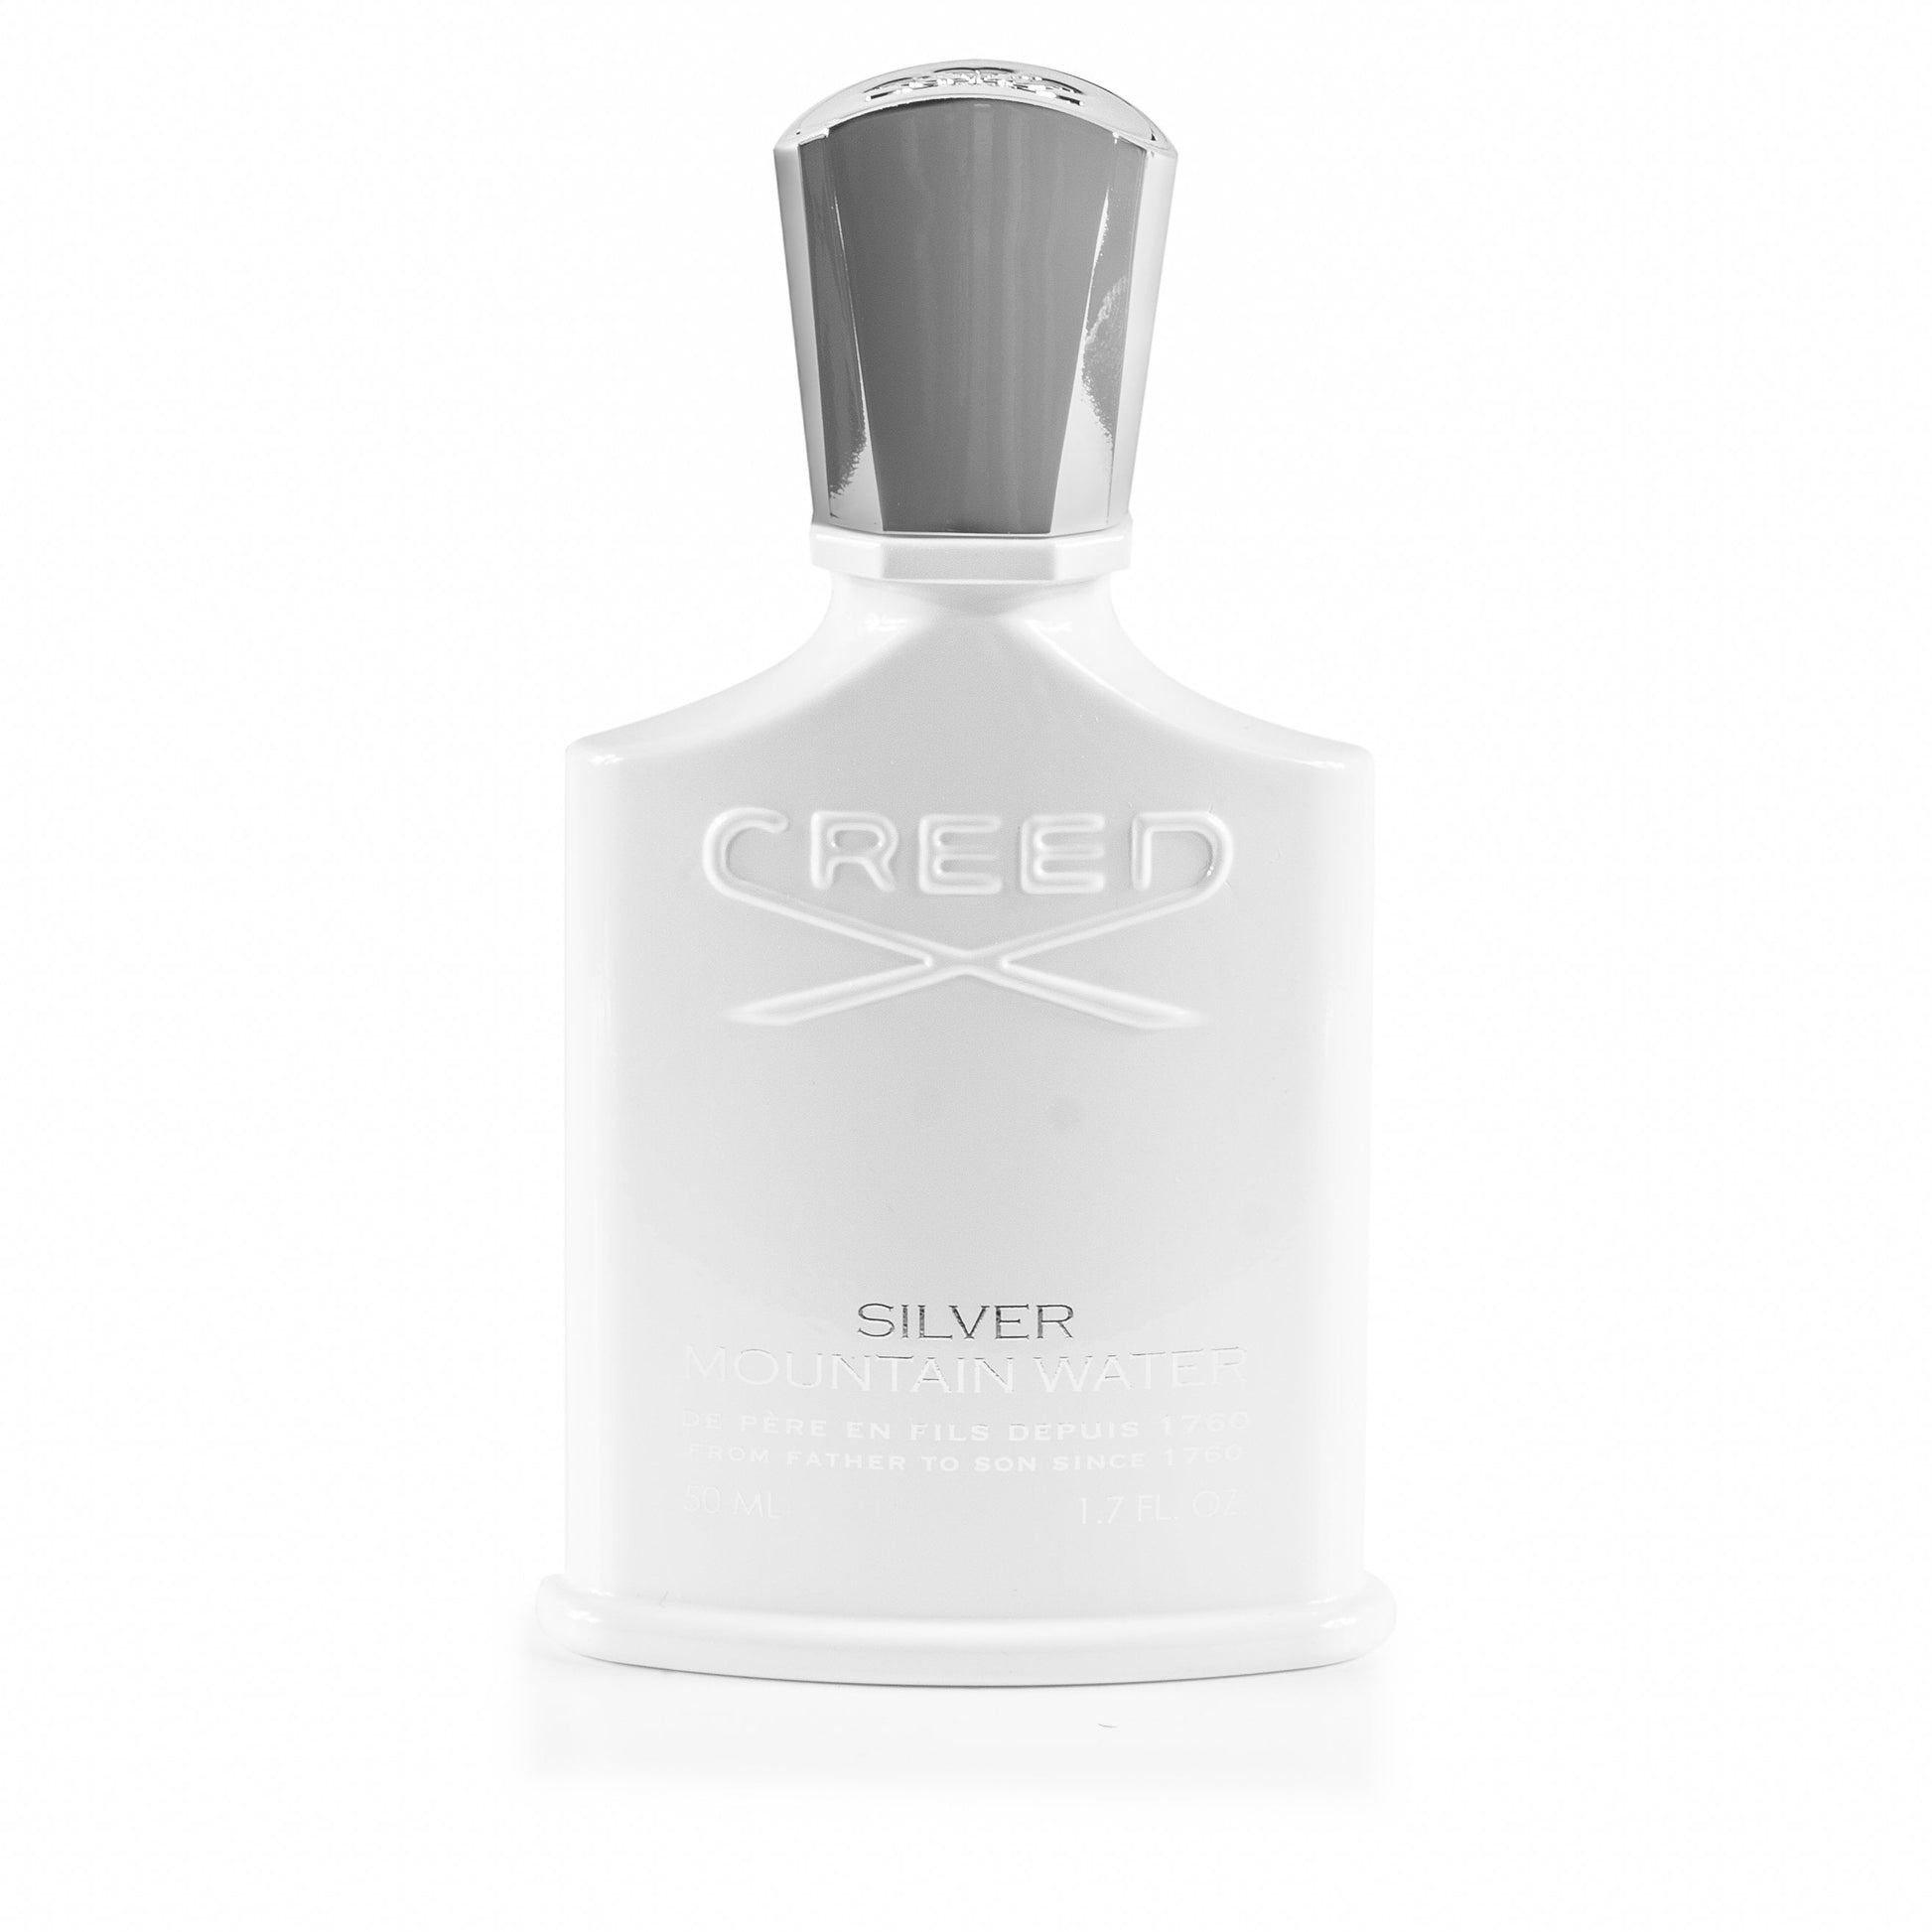 Silver Mountain Water Eau de Parfum Spray for Men by Creed, Product image 8